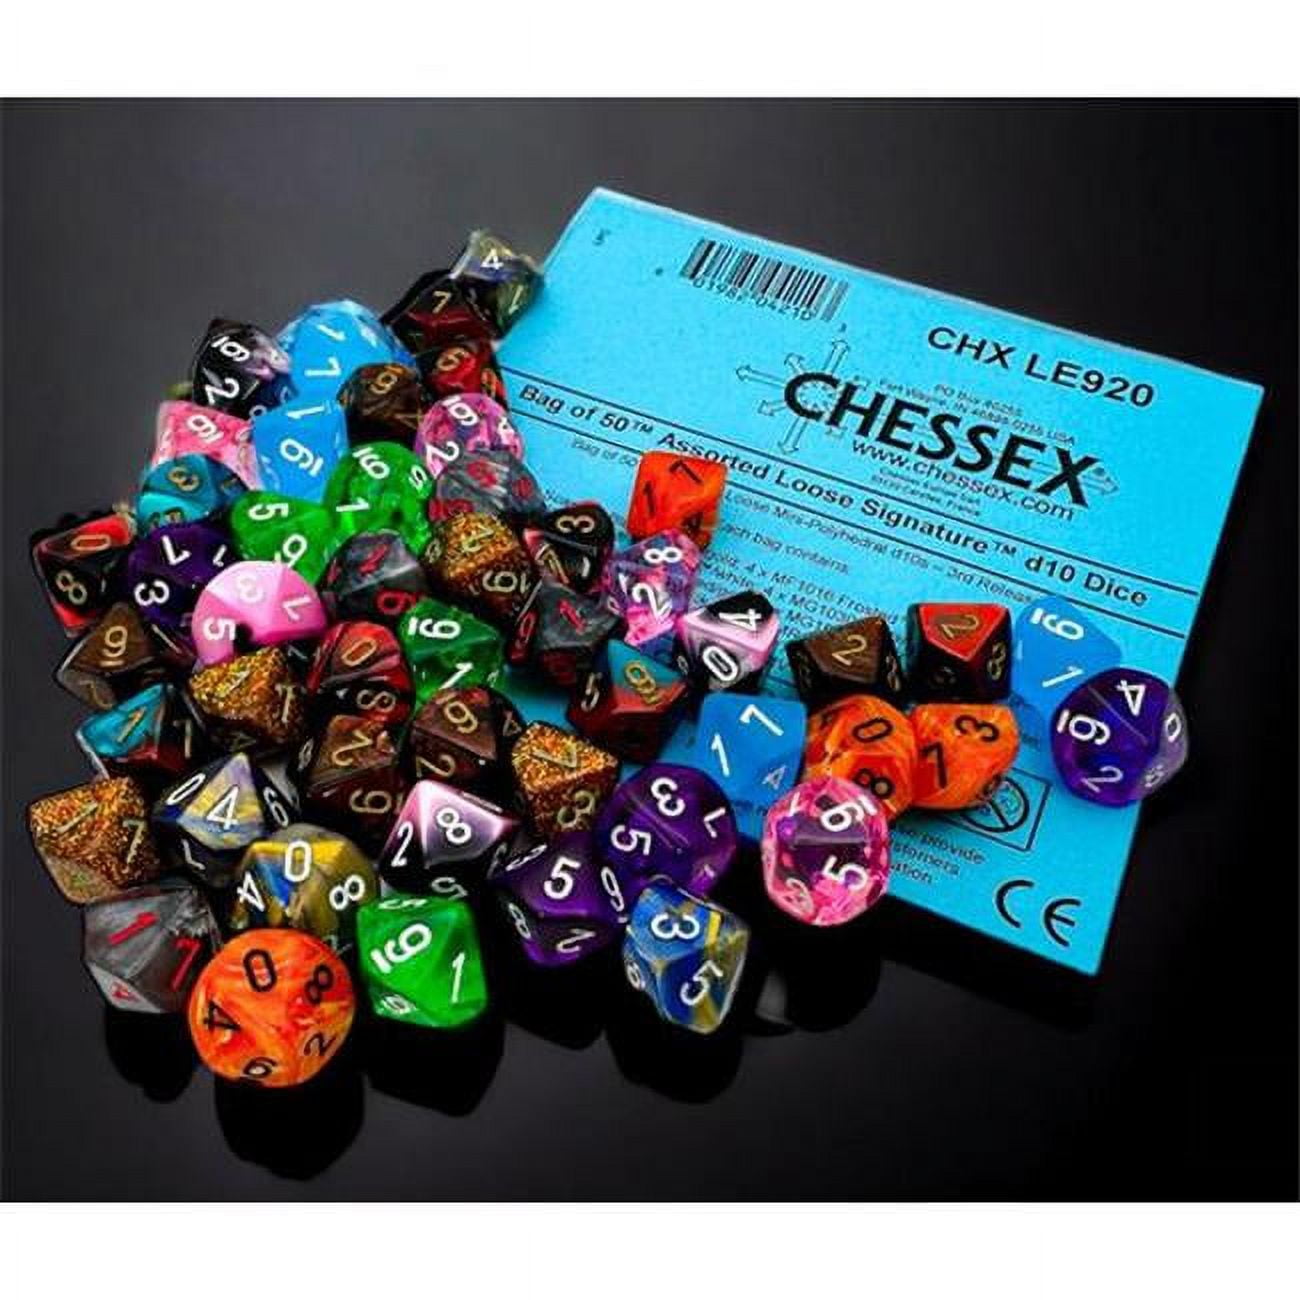 Chessex Manufacturing CHXLE920 Mini Assorted Loose D10s 3rd Release Dice Set - Bag of 50